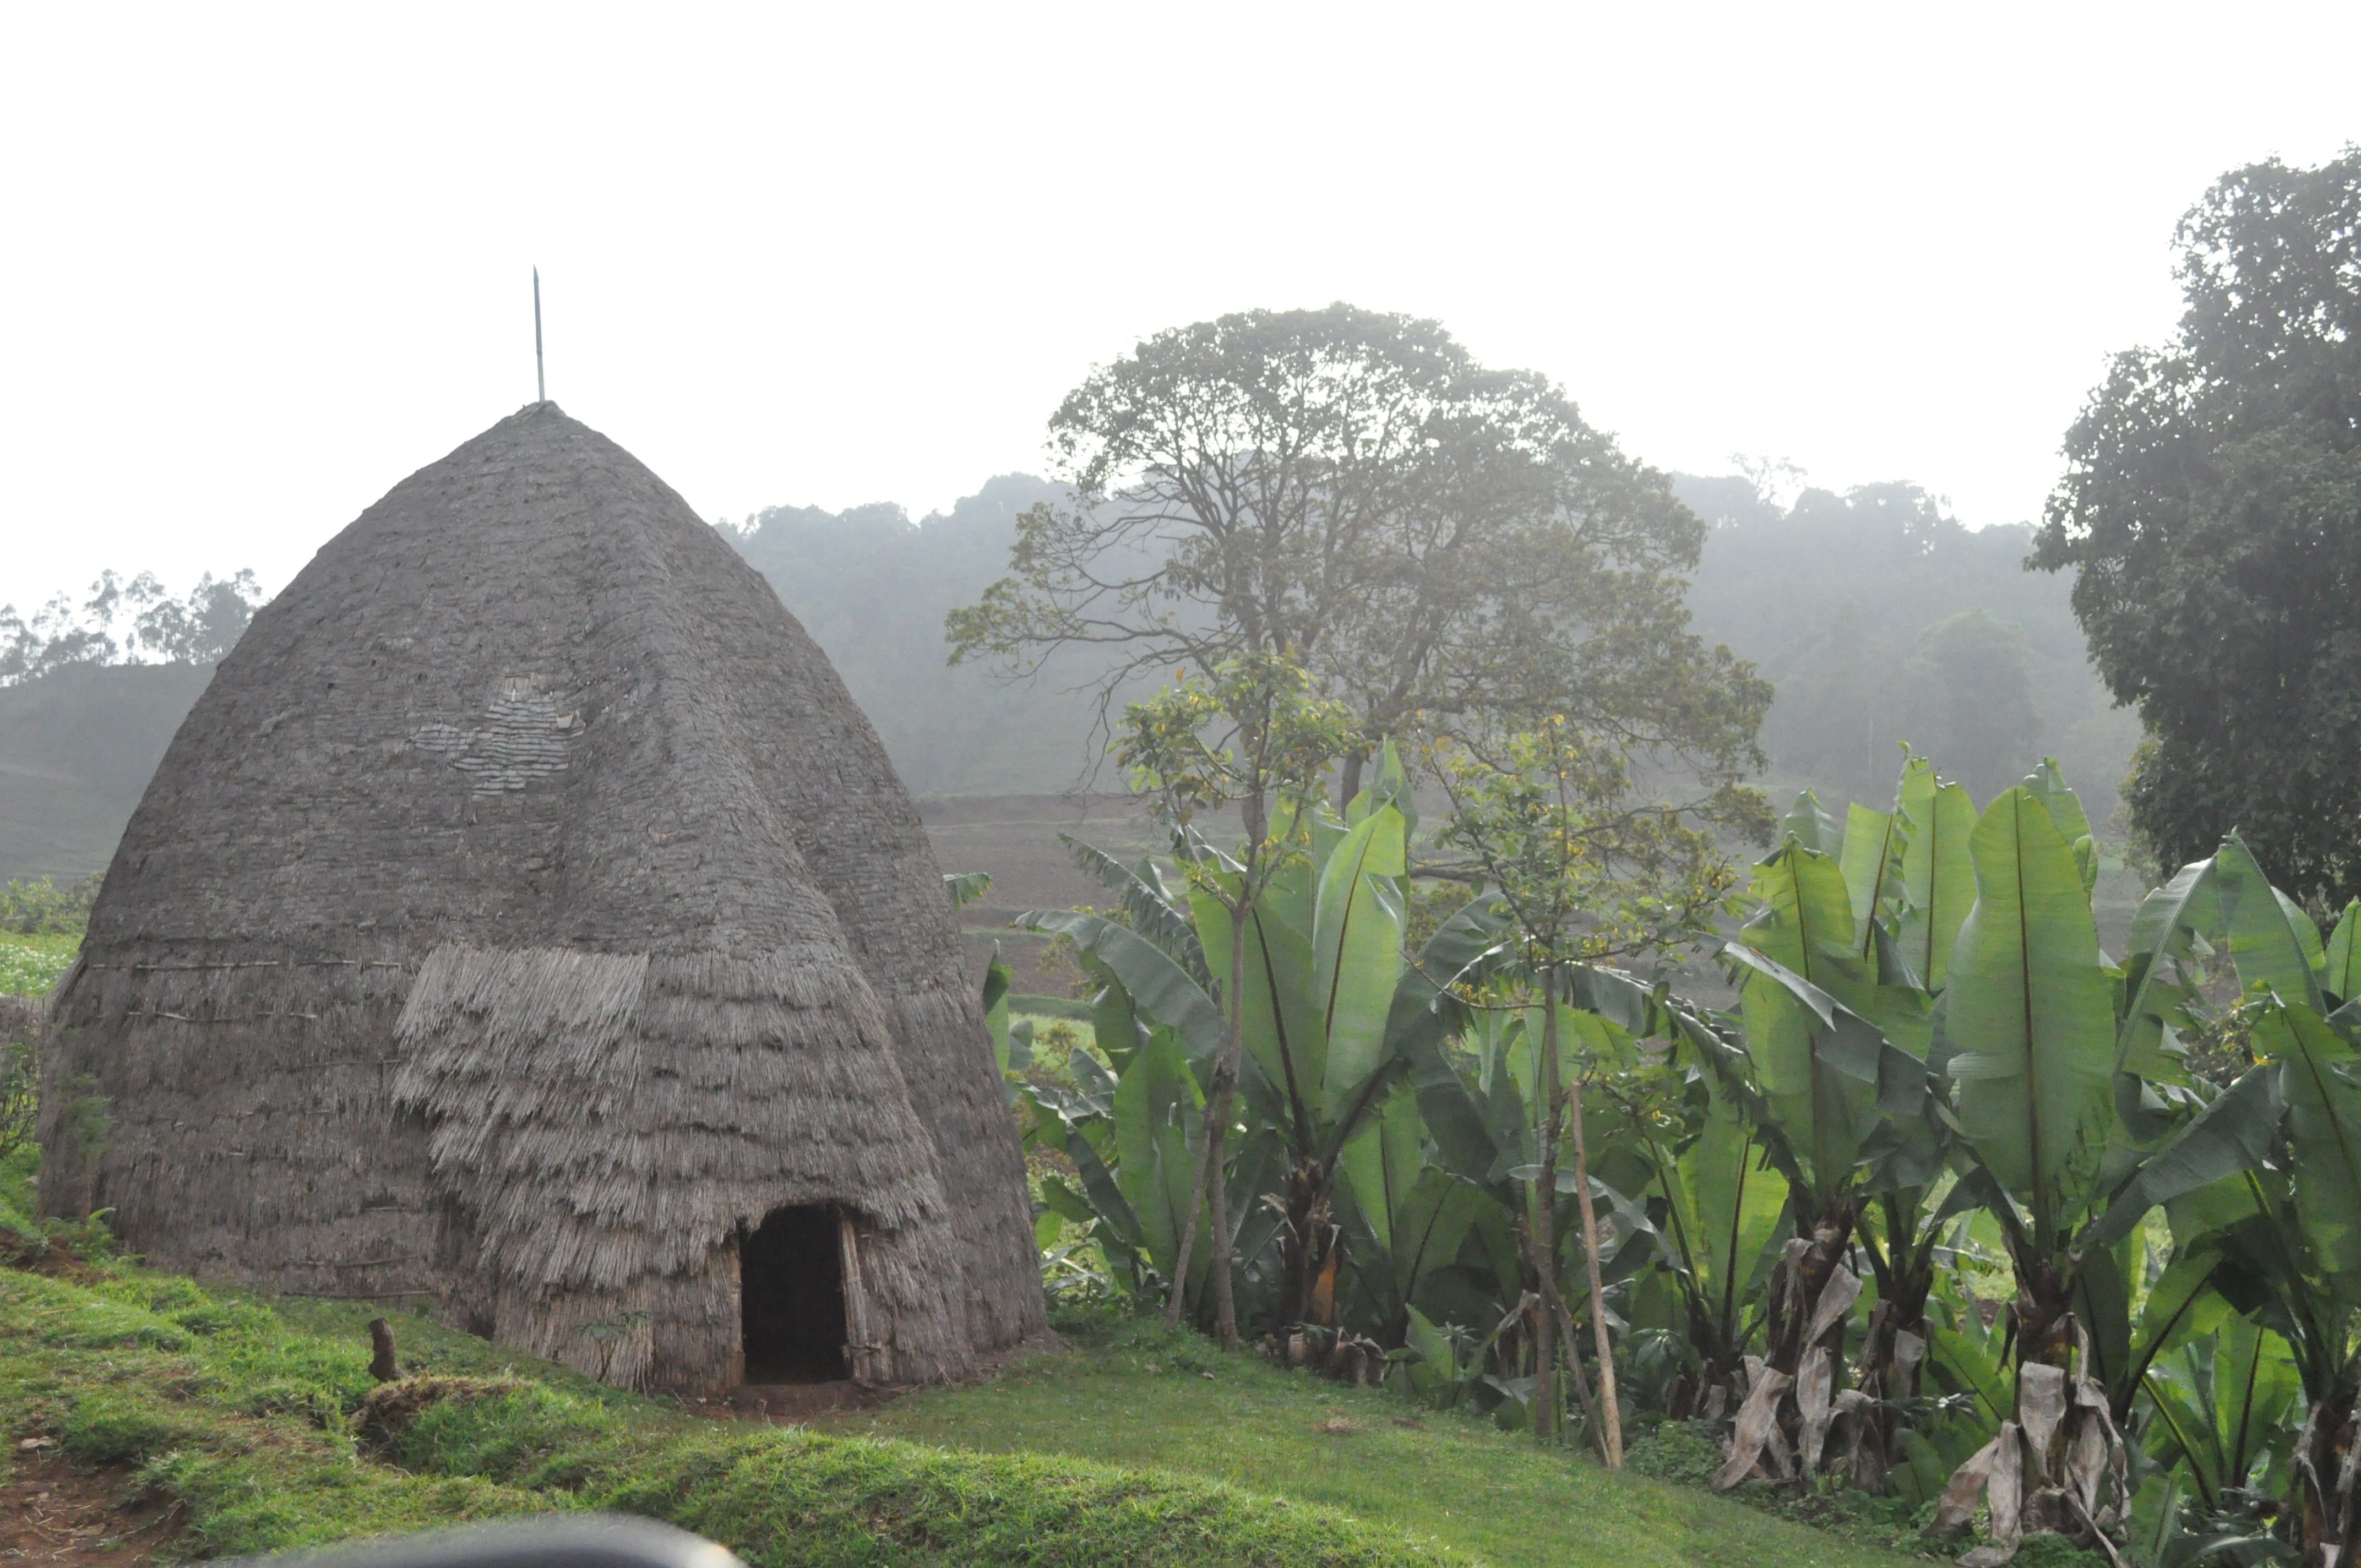 Image: Typical agricultural household with mixed crops in Ethiopia